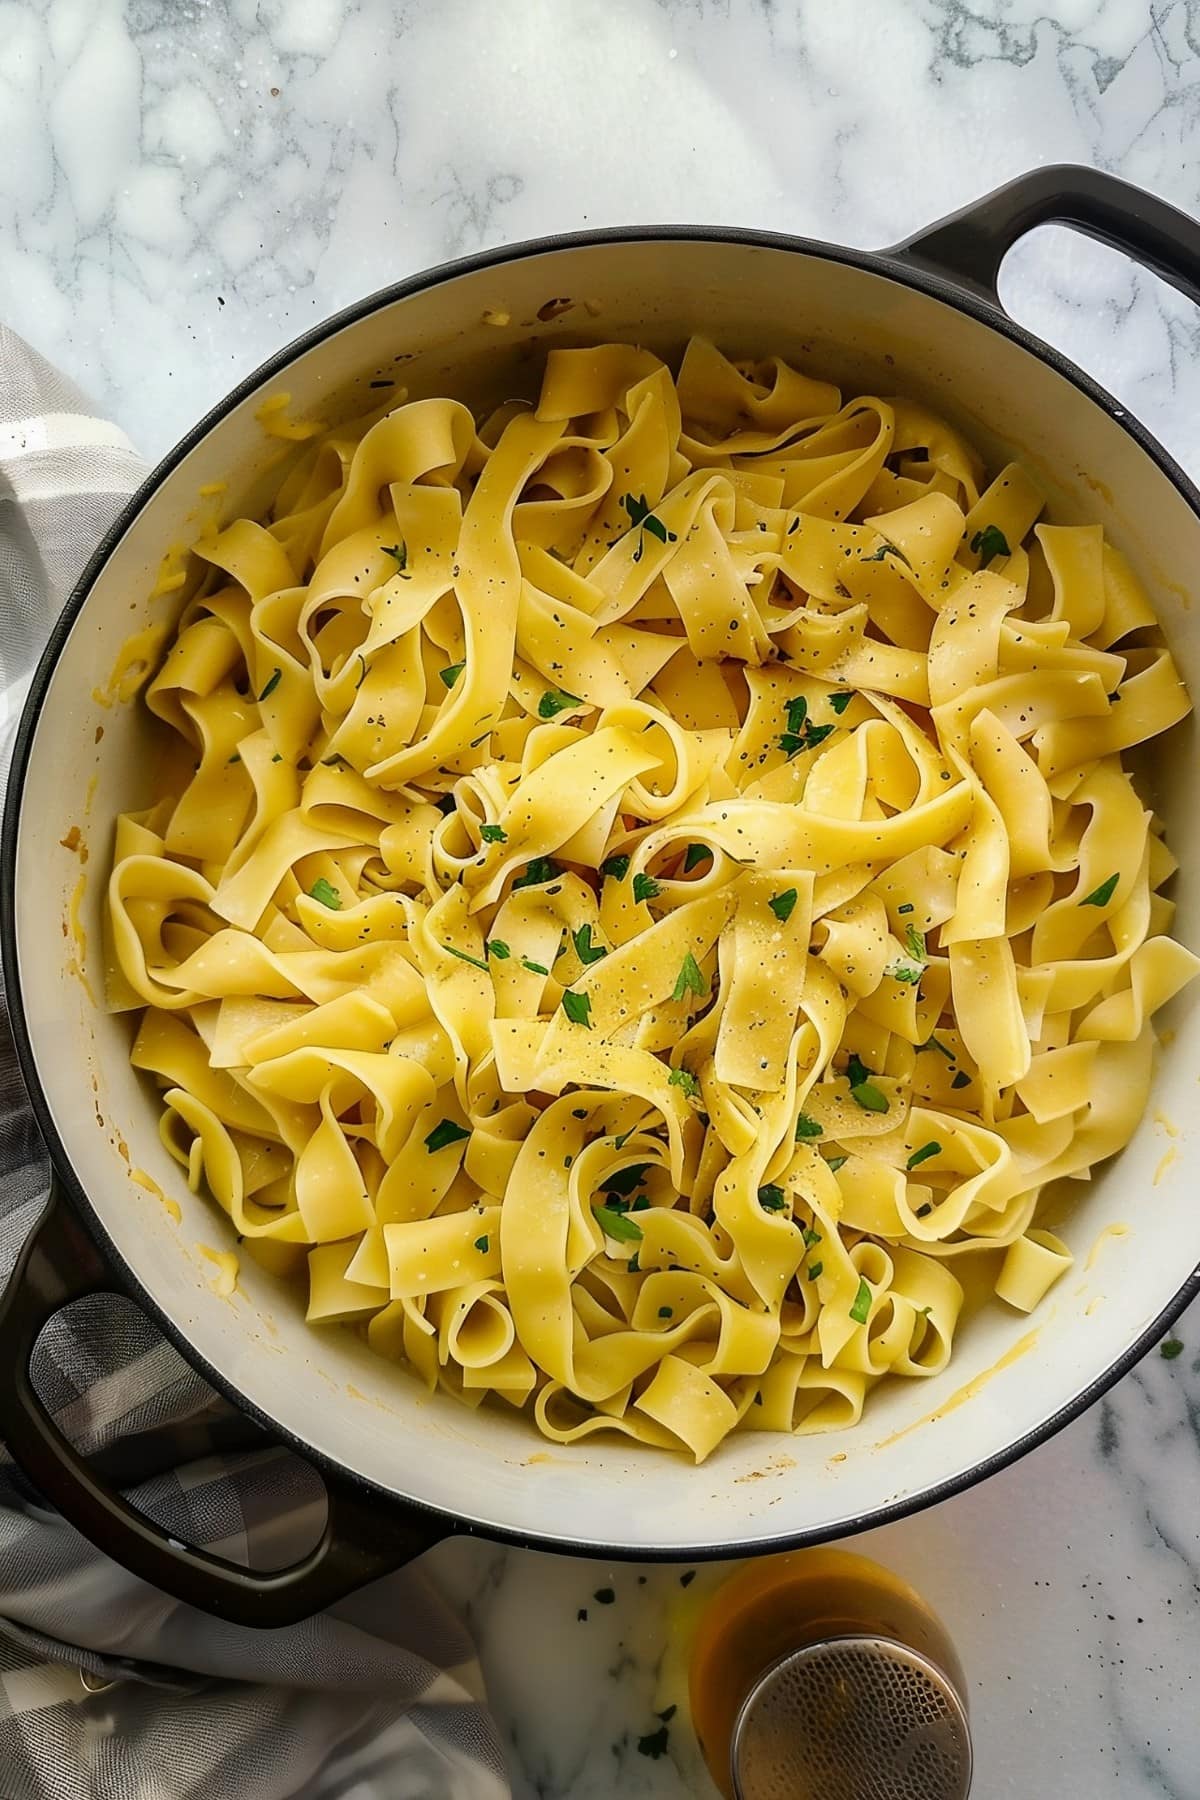 A large pot of rich and hearty Amish egg noodles with parsley, overhead view